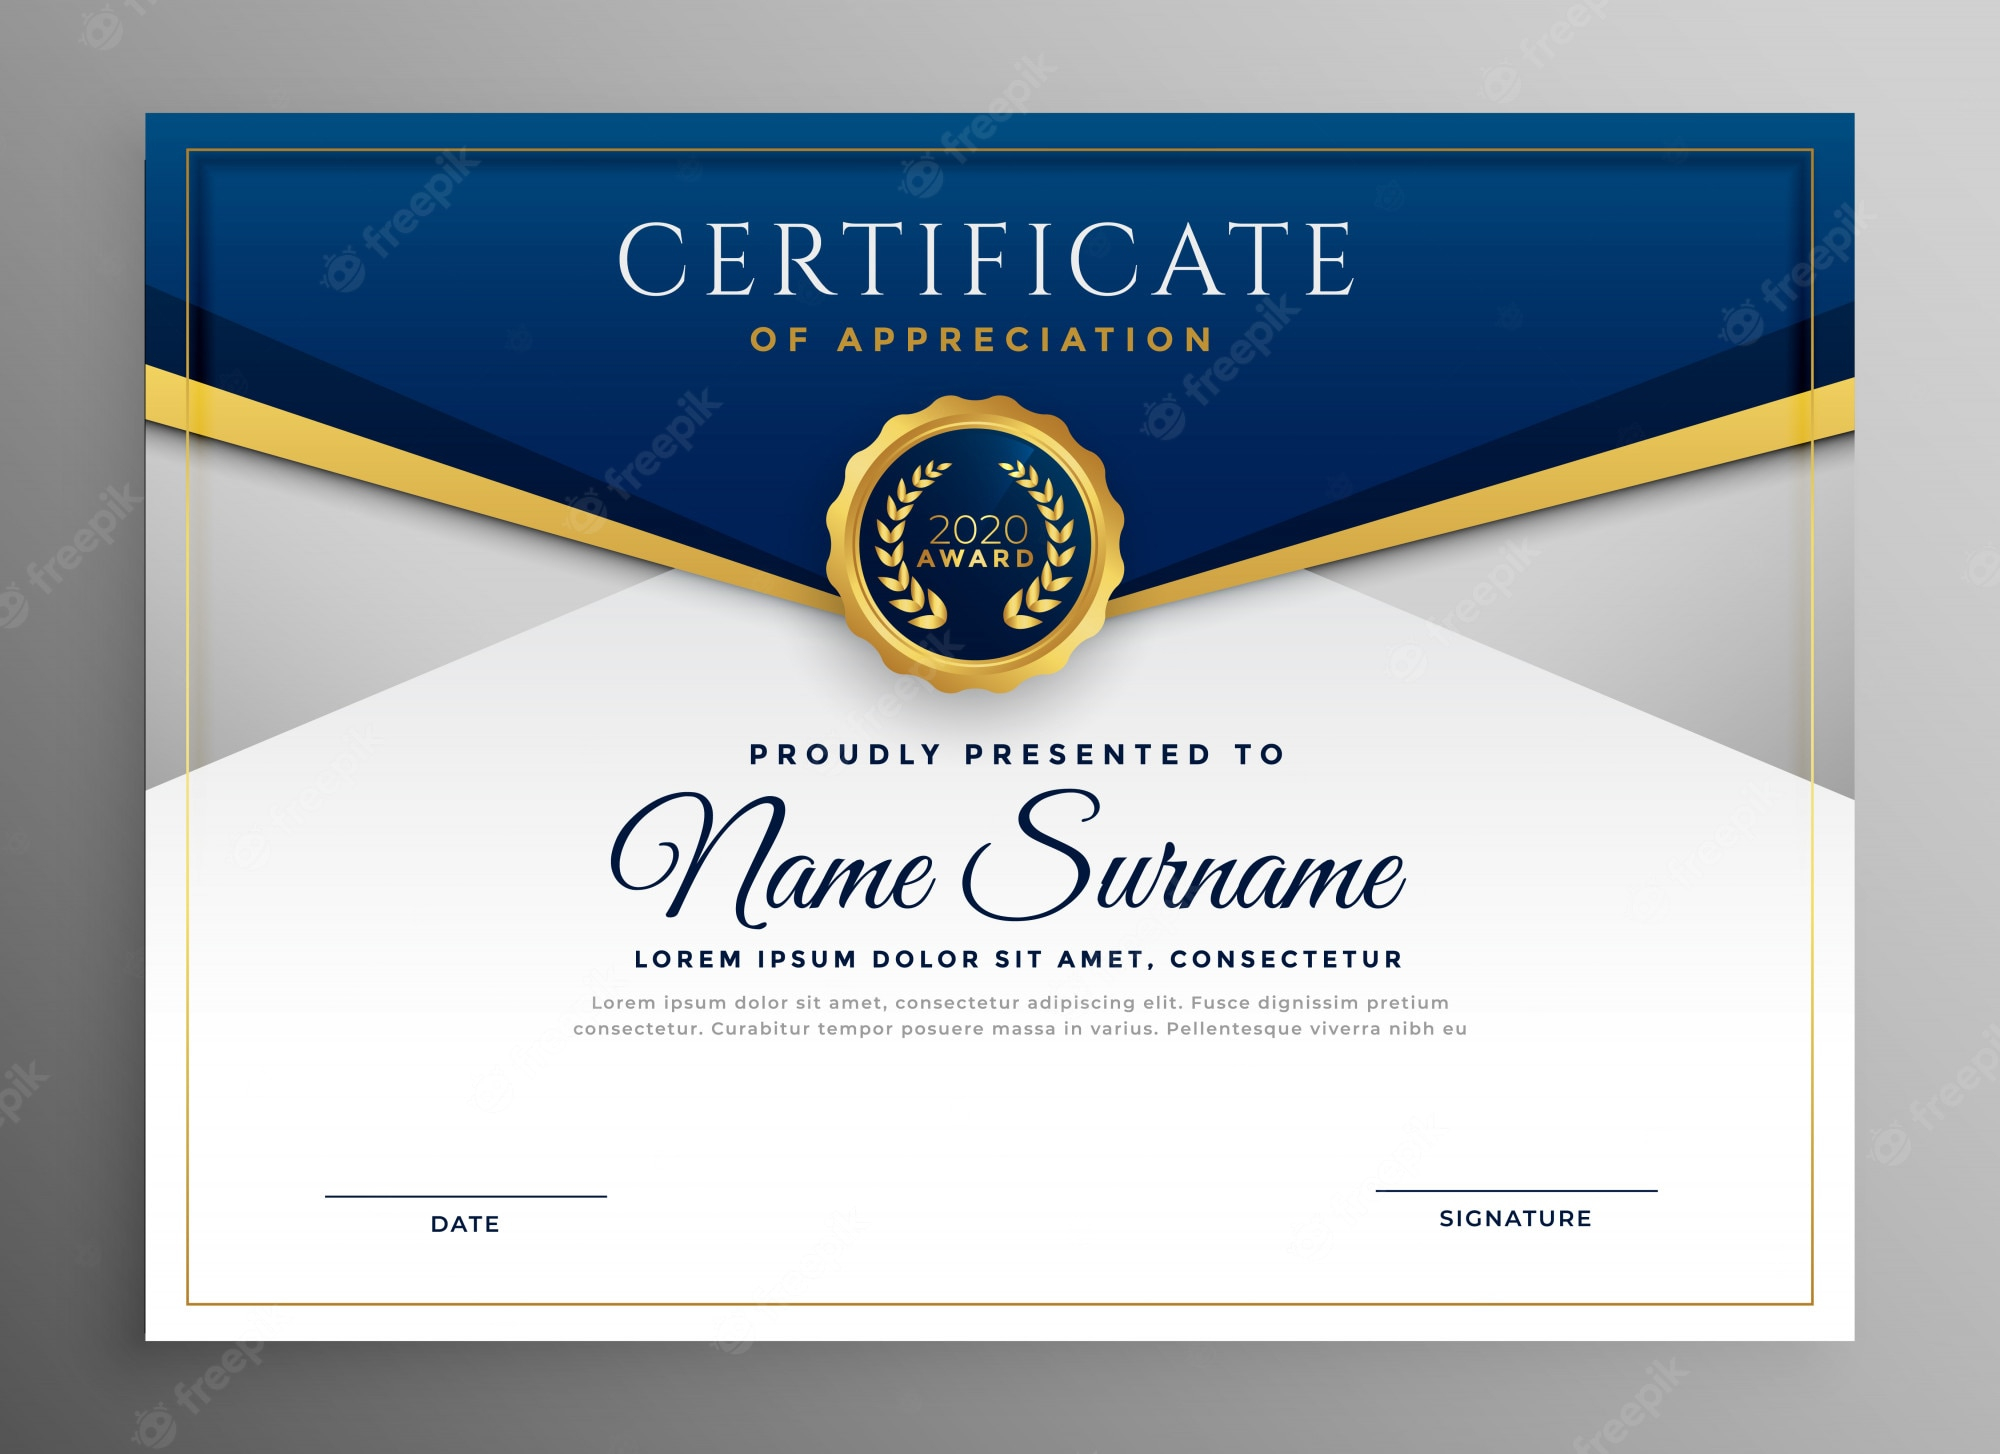 Certificate of recognition Images  Free Vectors, Stock Photos & PSD Inside Free Template For Certificate Of Recognition